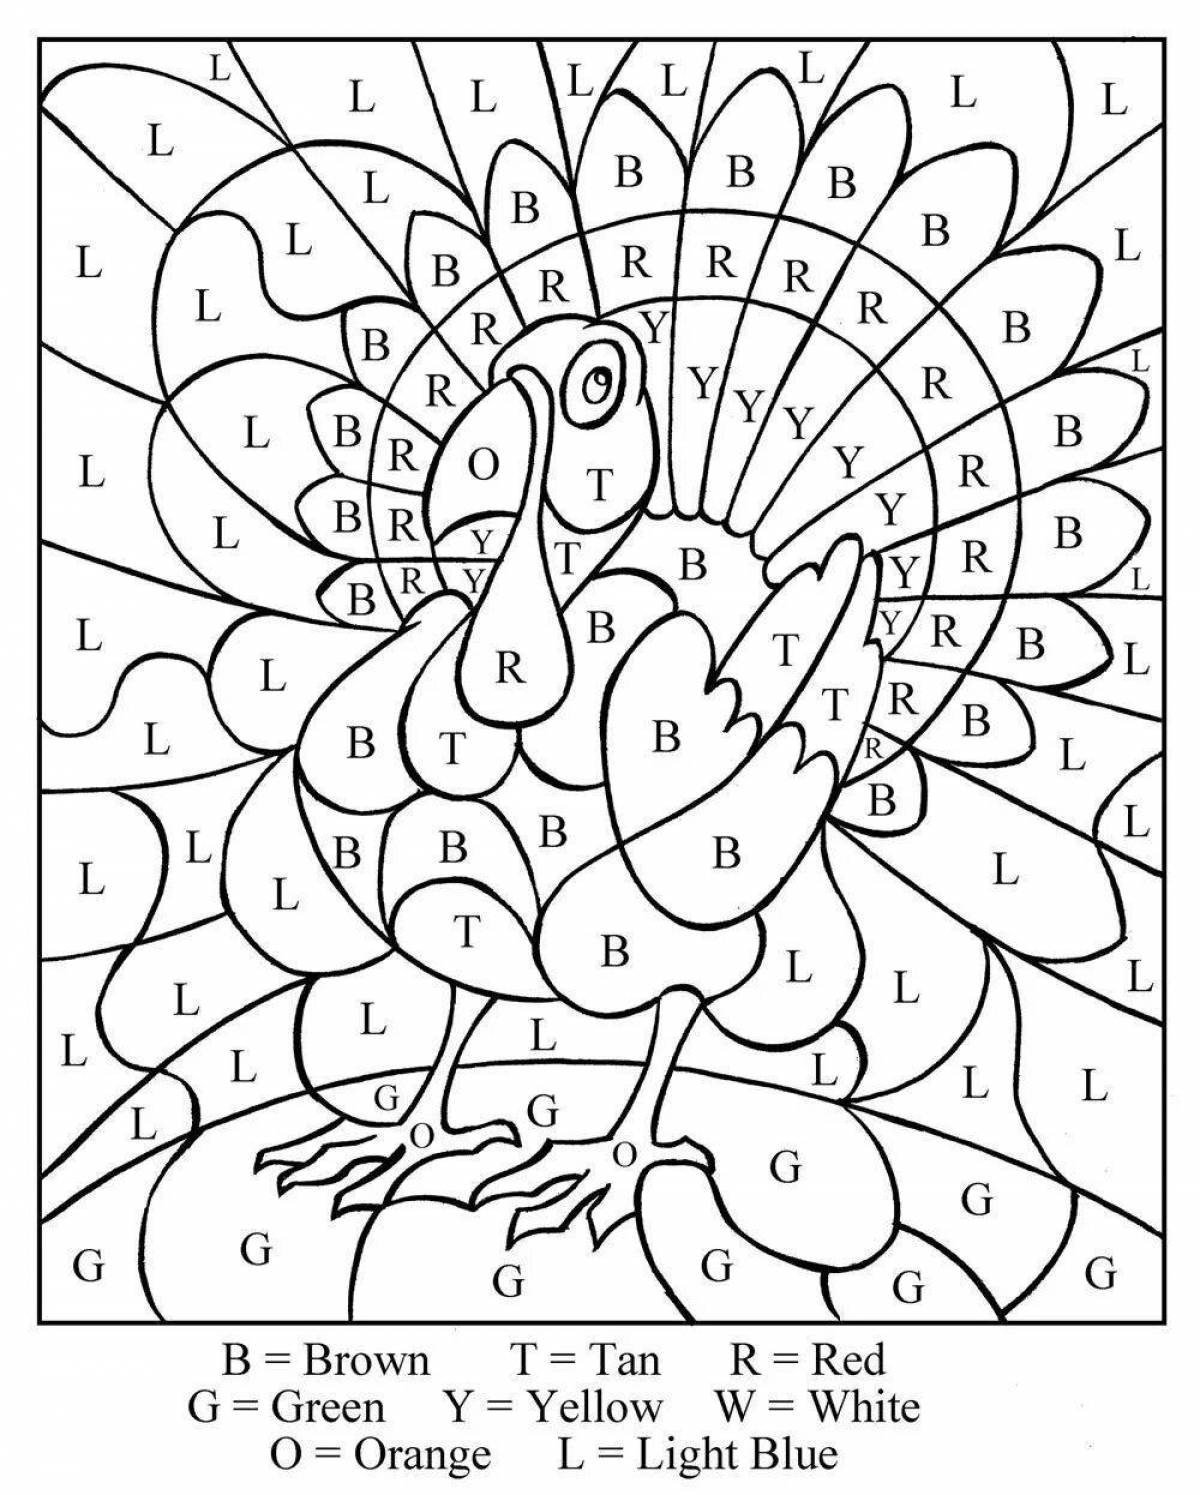 Fun coloring book with letters and numbers for preschoolers